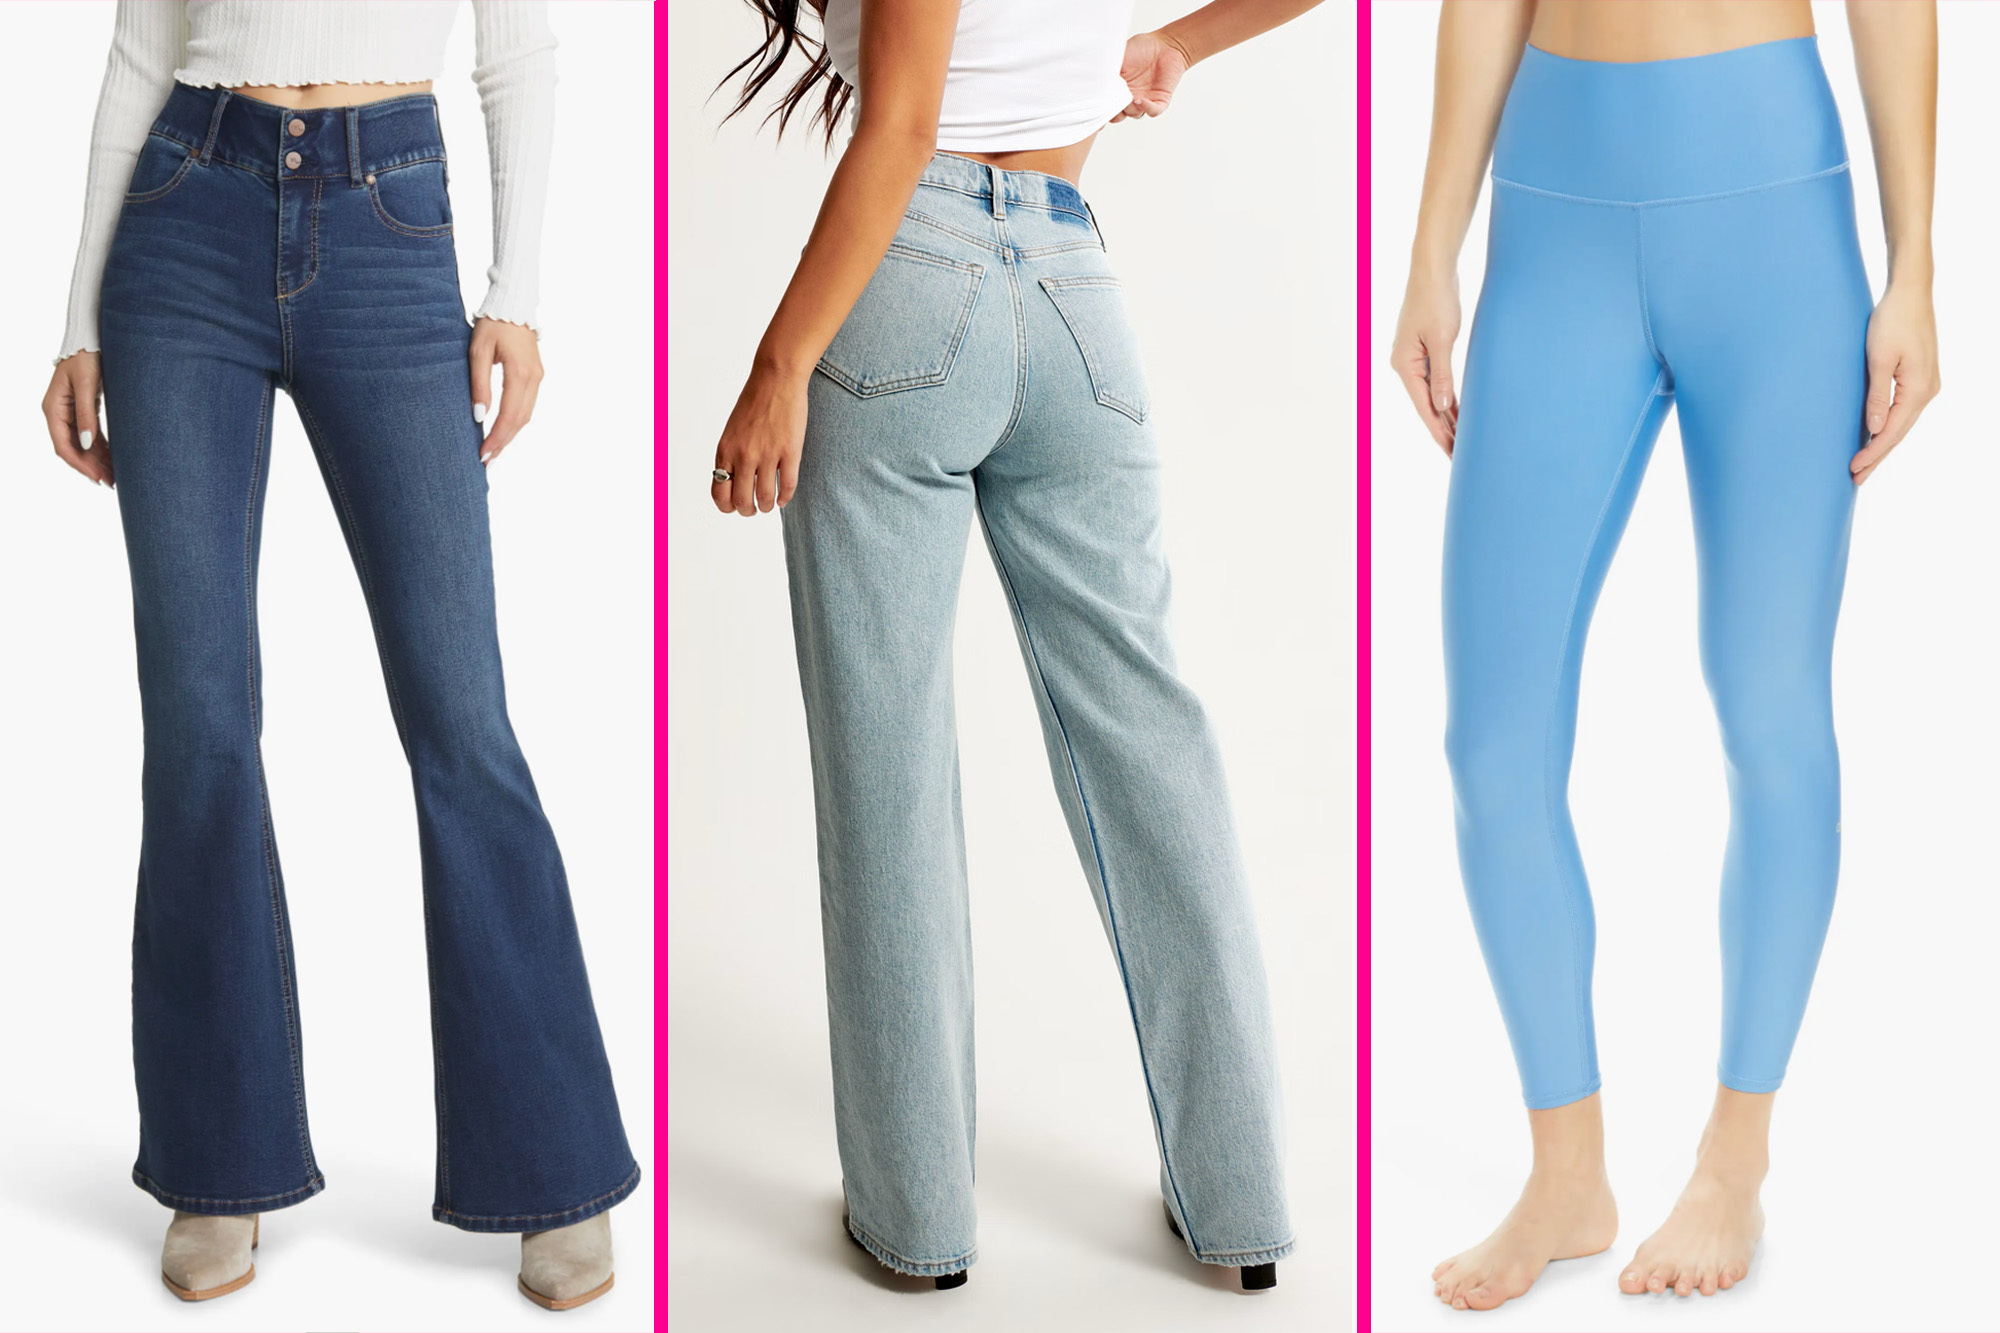 15 Figure-Flattering Pants That Are Chic and Ultra-Comfy